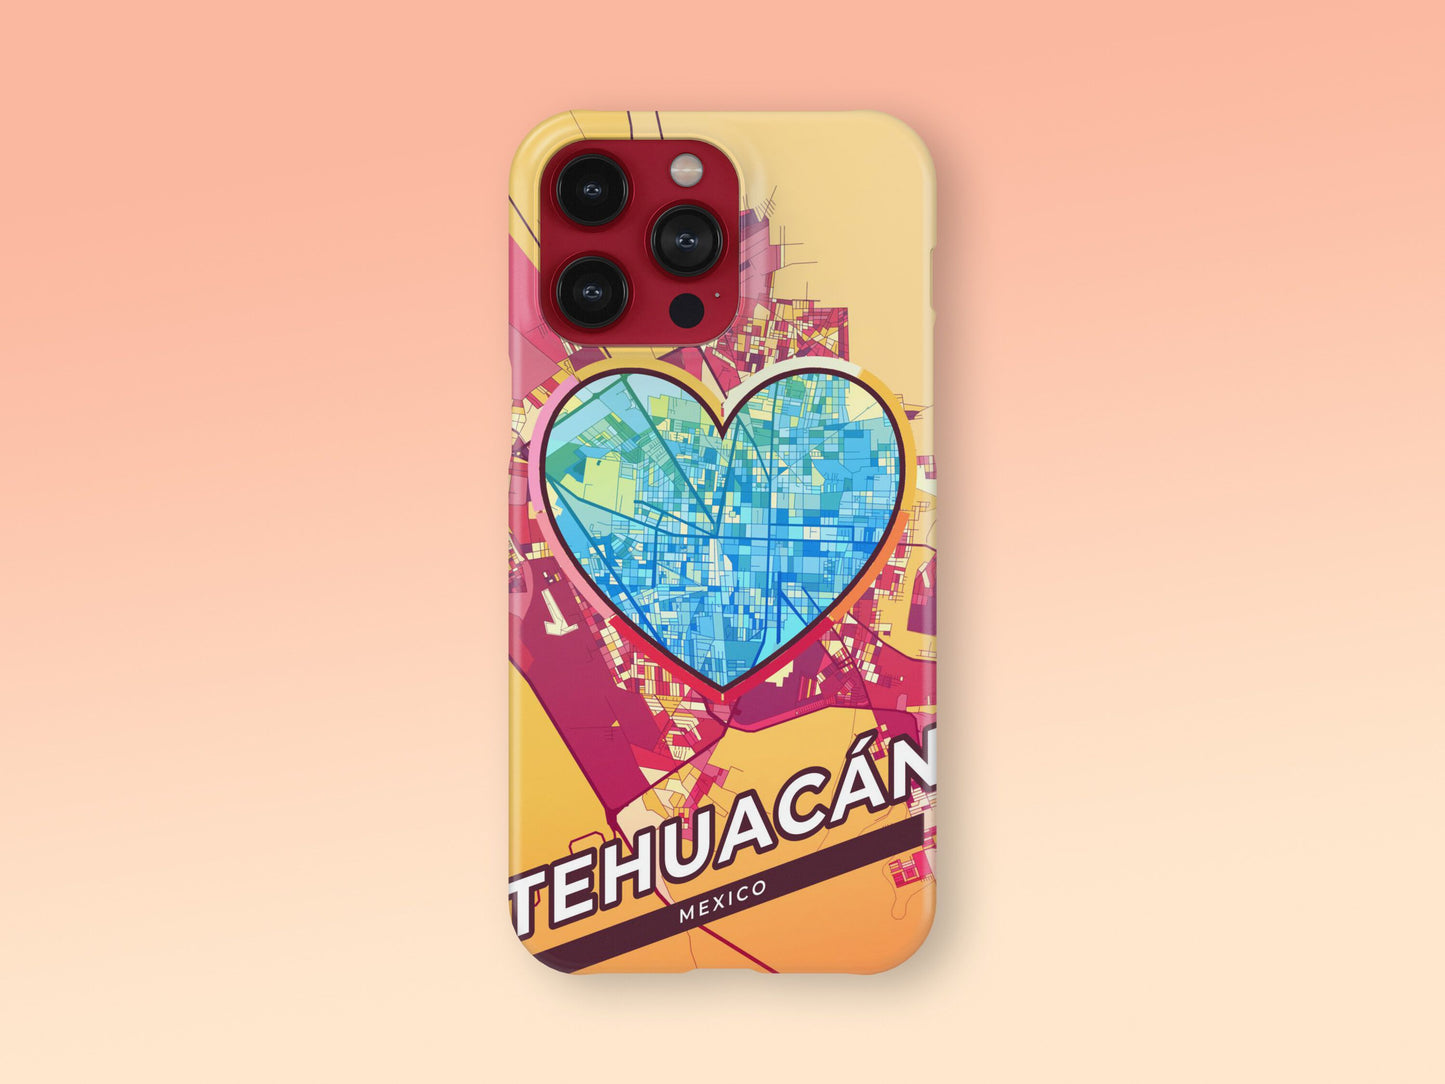 Tehuacán Mexico slim phone case with colorful icon 2